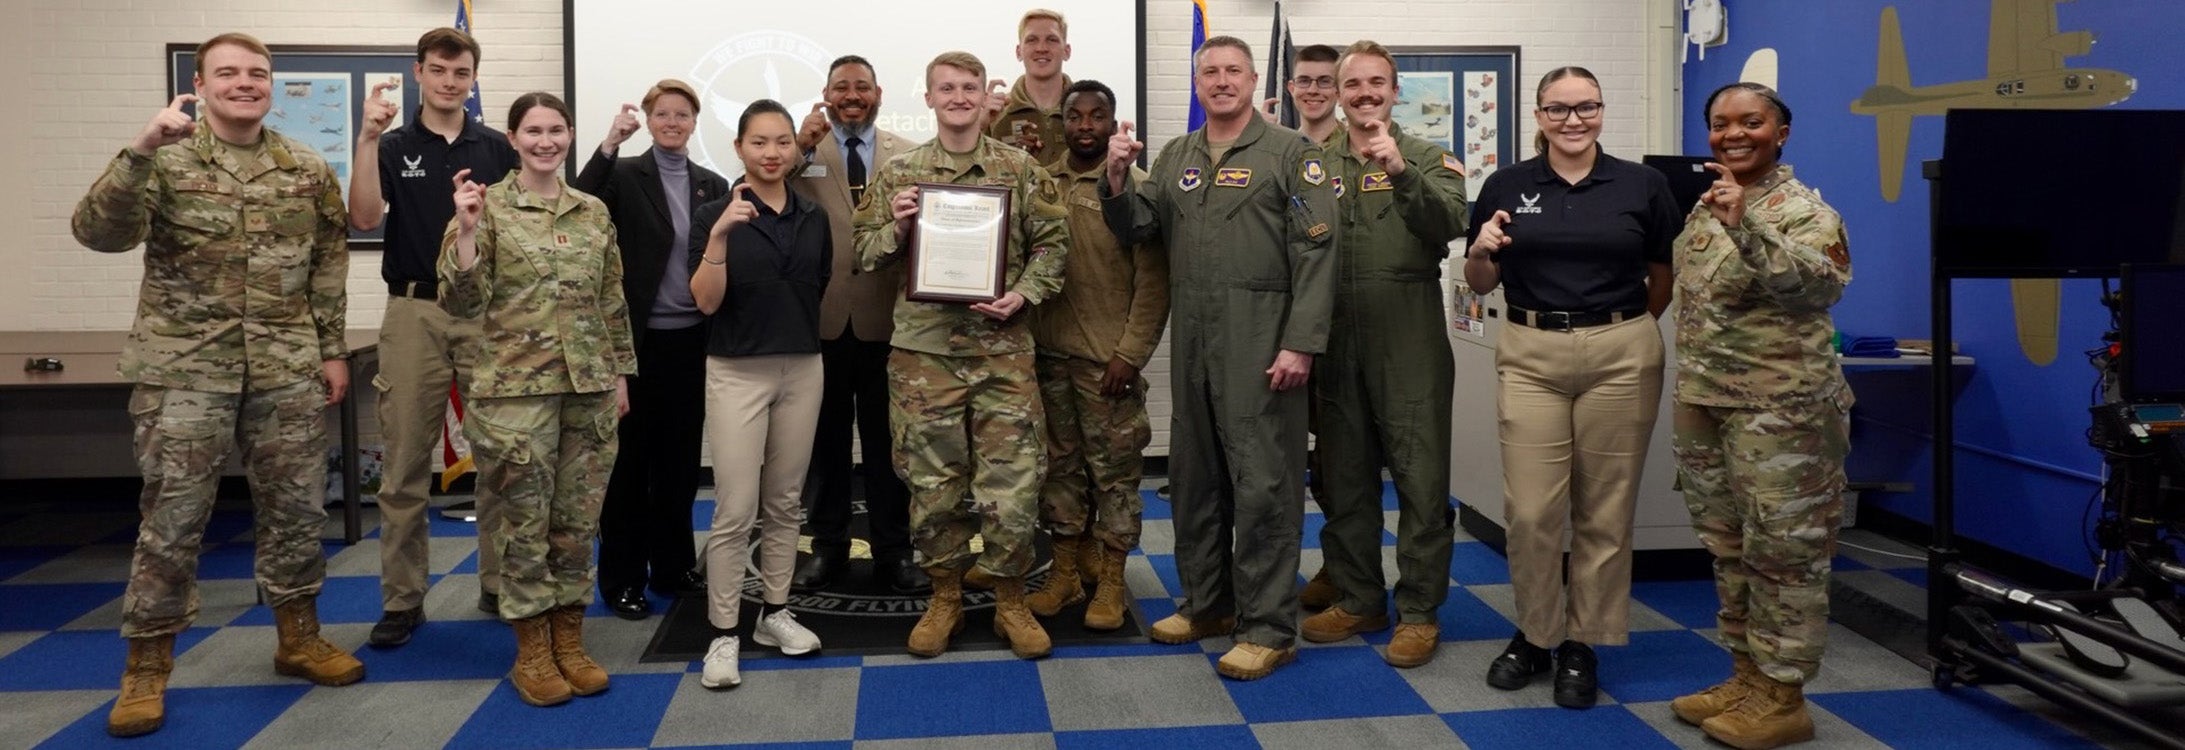 Representatives of ECU Air Force ROTC receive the official Congressional Record.